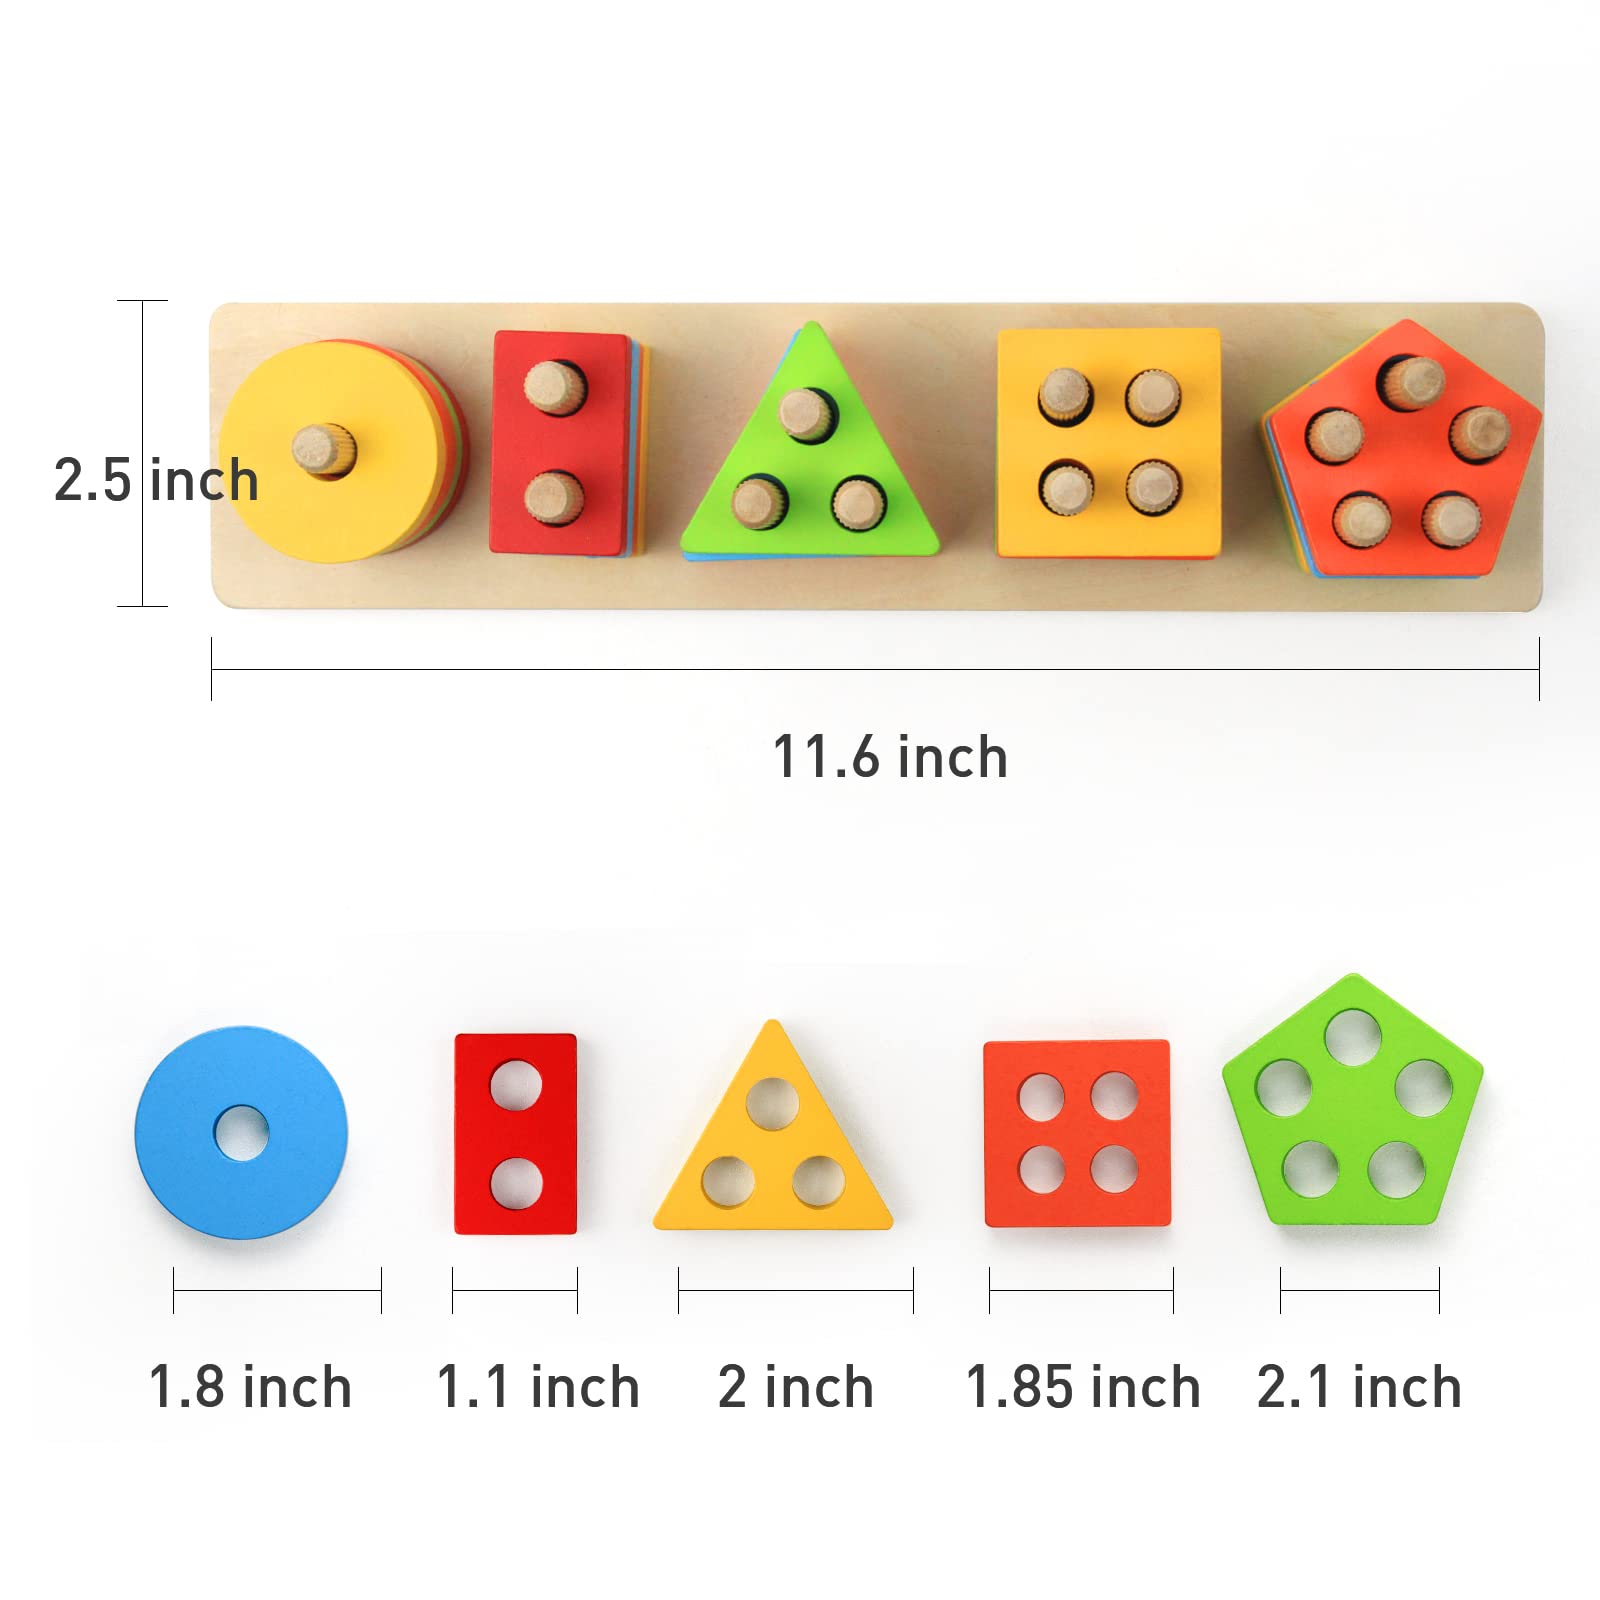 WOOD CITY Wooden Sorting & Stacking Toy, Shape Sorter Toys for Toddlers, Montessori Color Recognition Stacker, Early Educational Block Puzzles for Kids 1 2 3 Years Old Boys and Girls (5 Shapes)